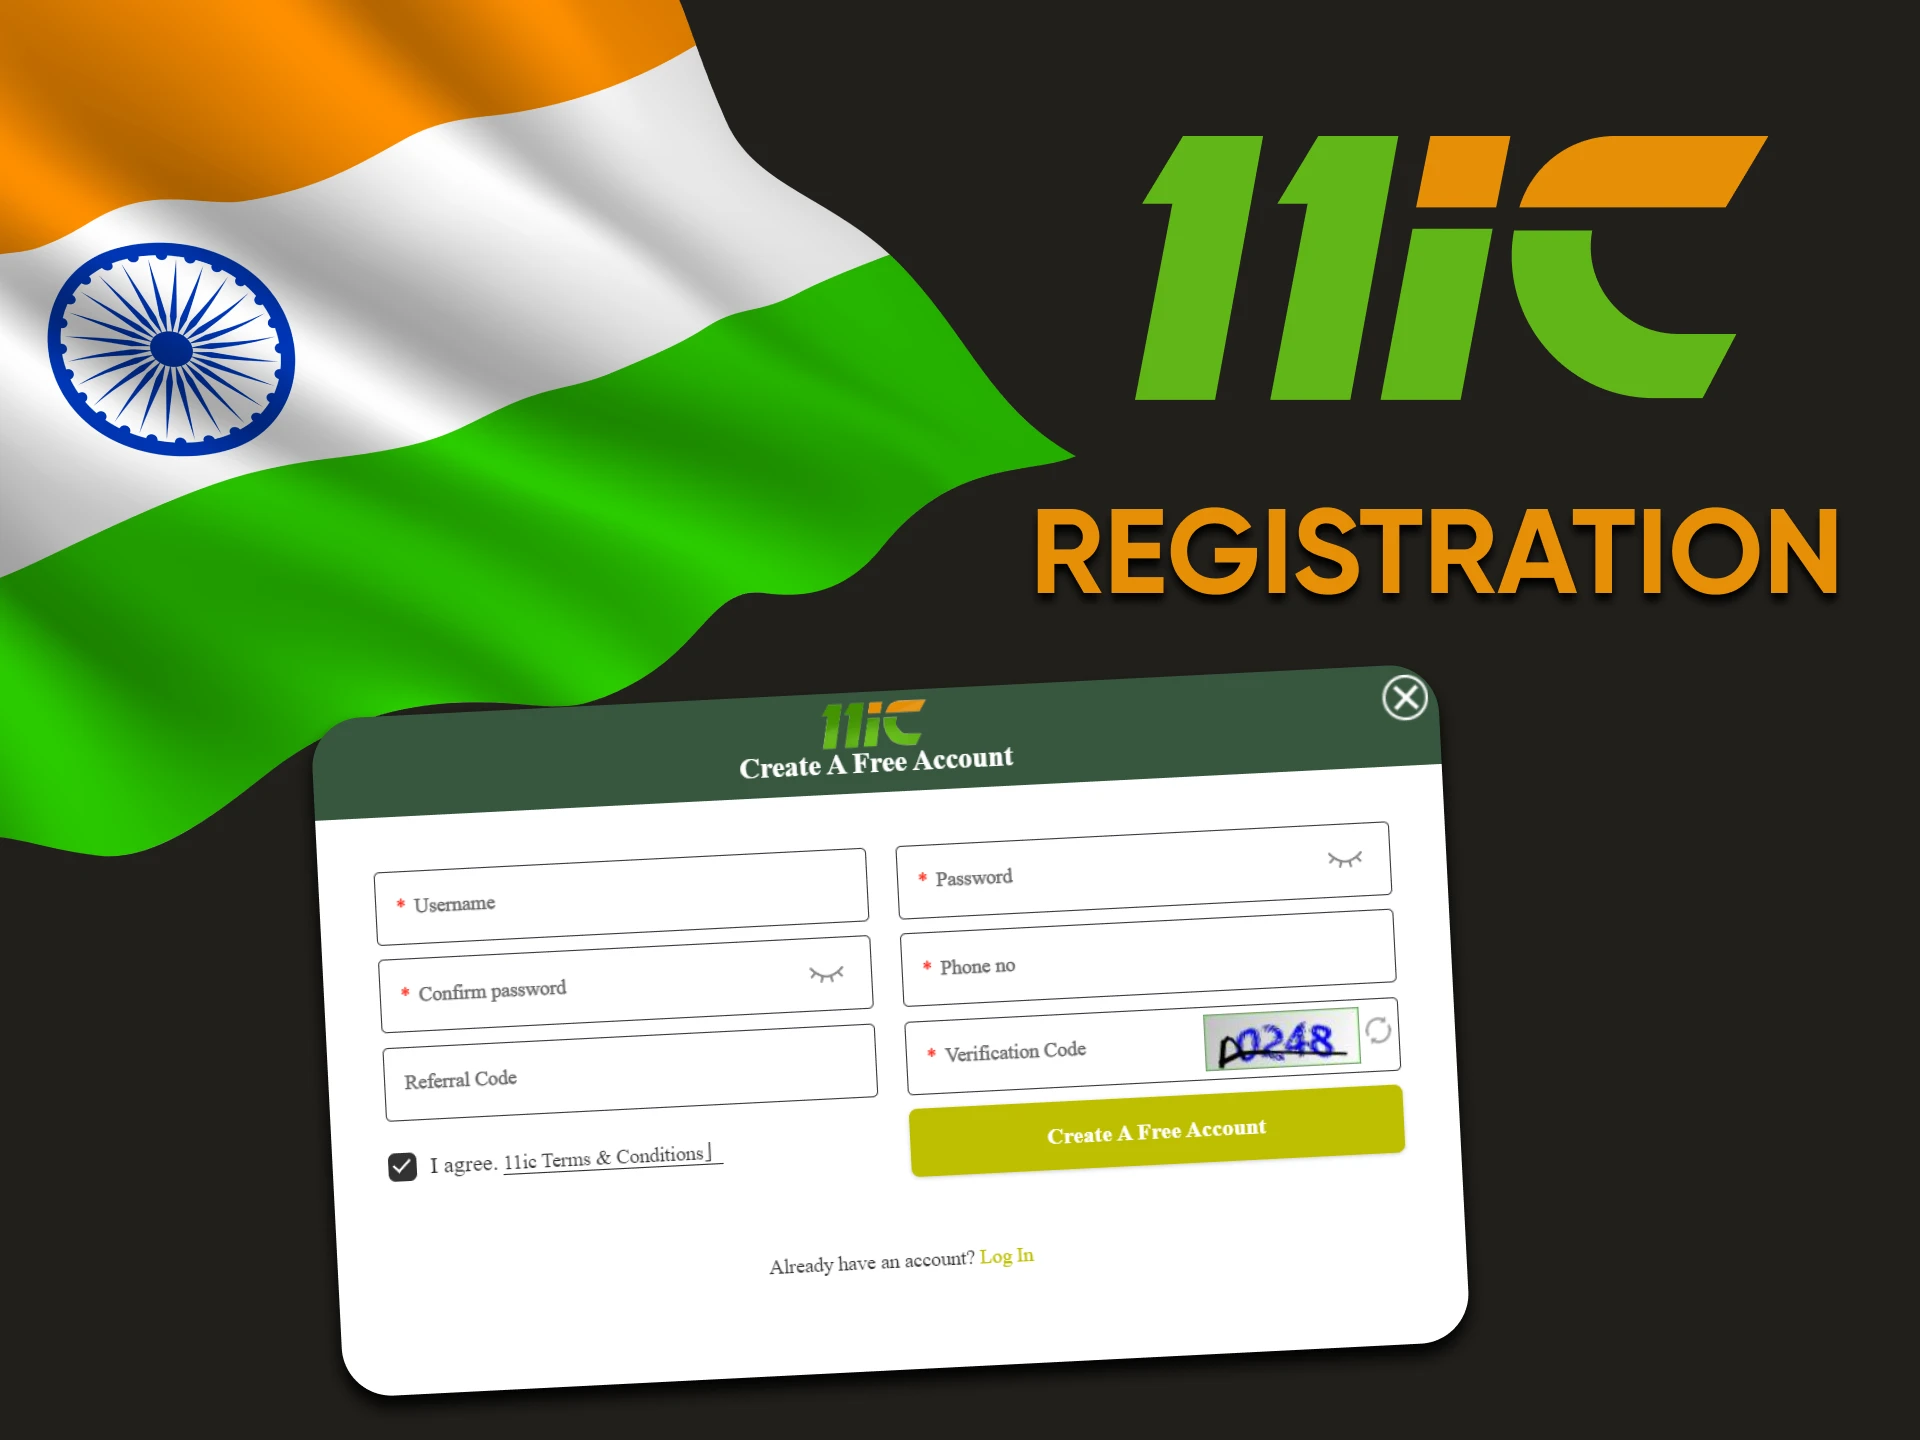 We will tell you about registering for 11ic.